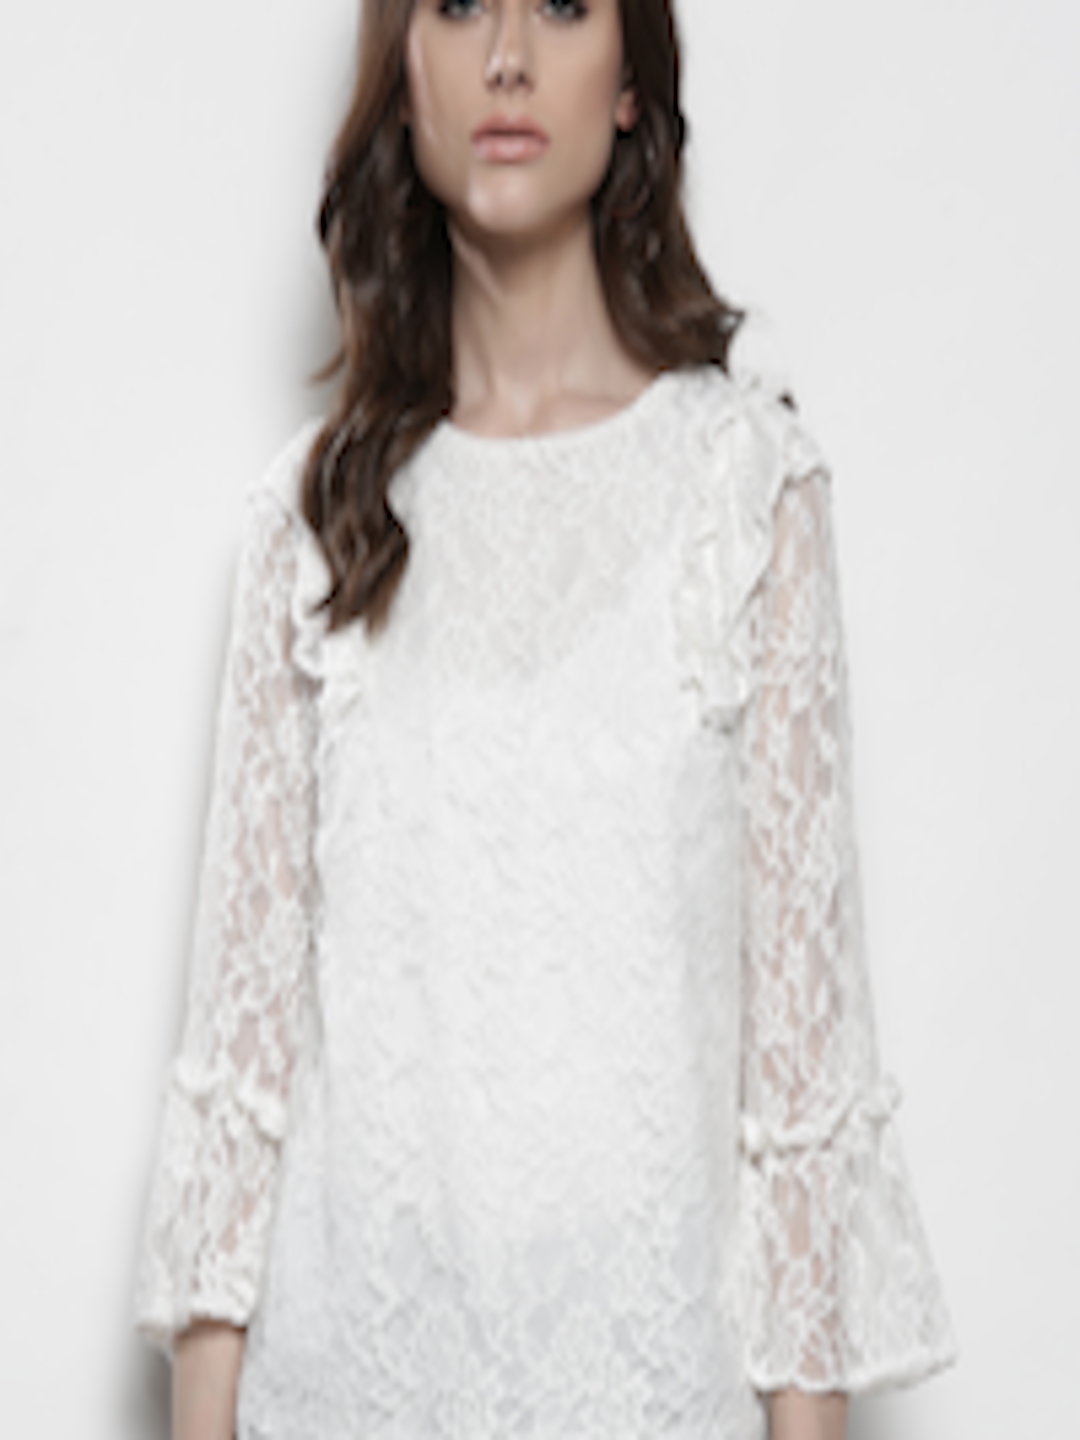 Buy DOROTHY PERKINS Women White Lace Top - Tops for Women 2386539 | Myntra